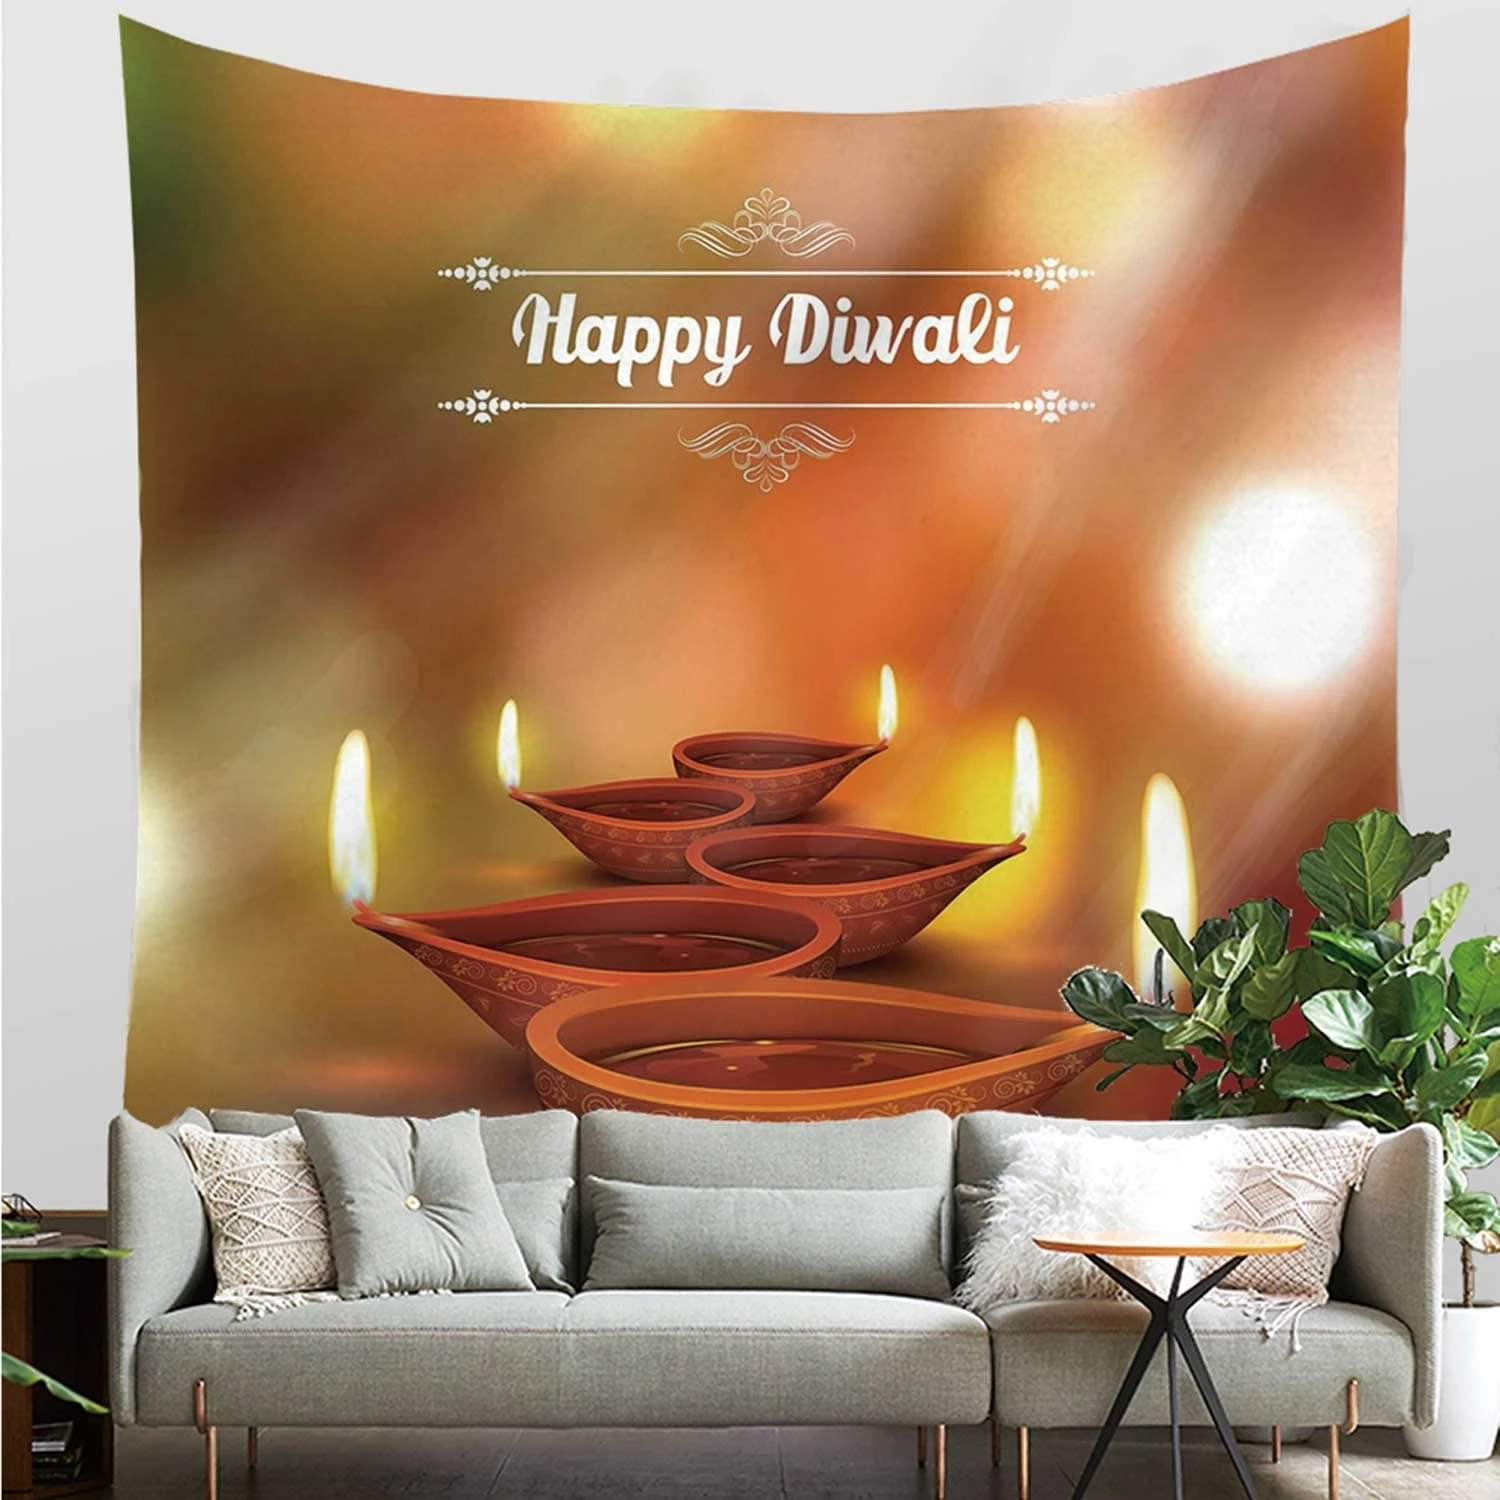 

Diwali Useful Tapestry,Eastern Religious Celebration with Best Wishes Happy Diwali Festive Spiritual Art Print for Dormitory